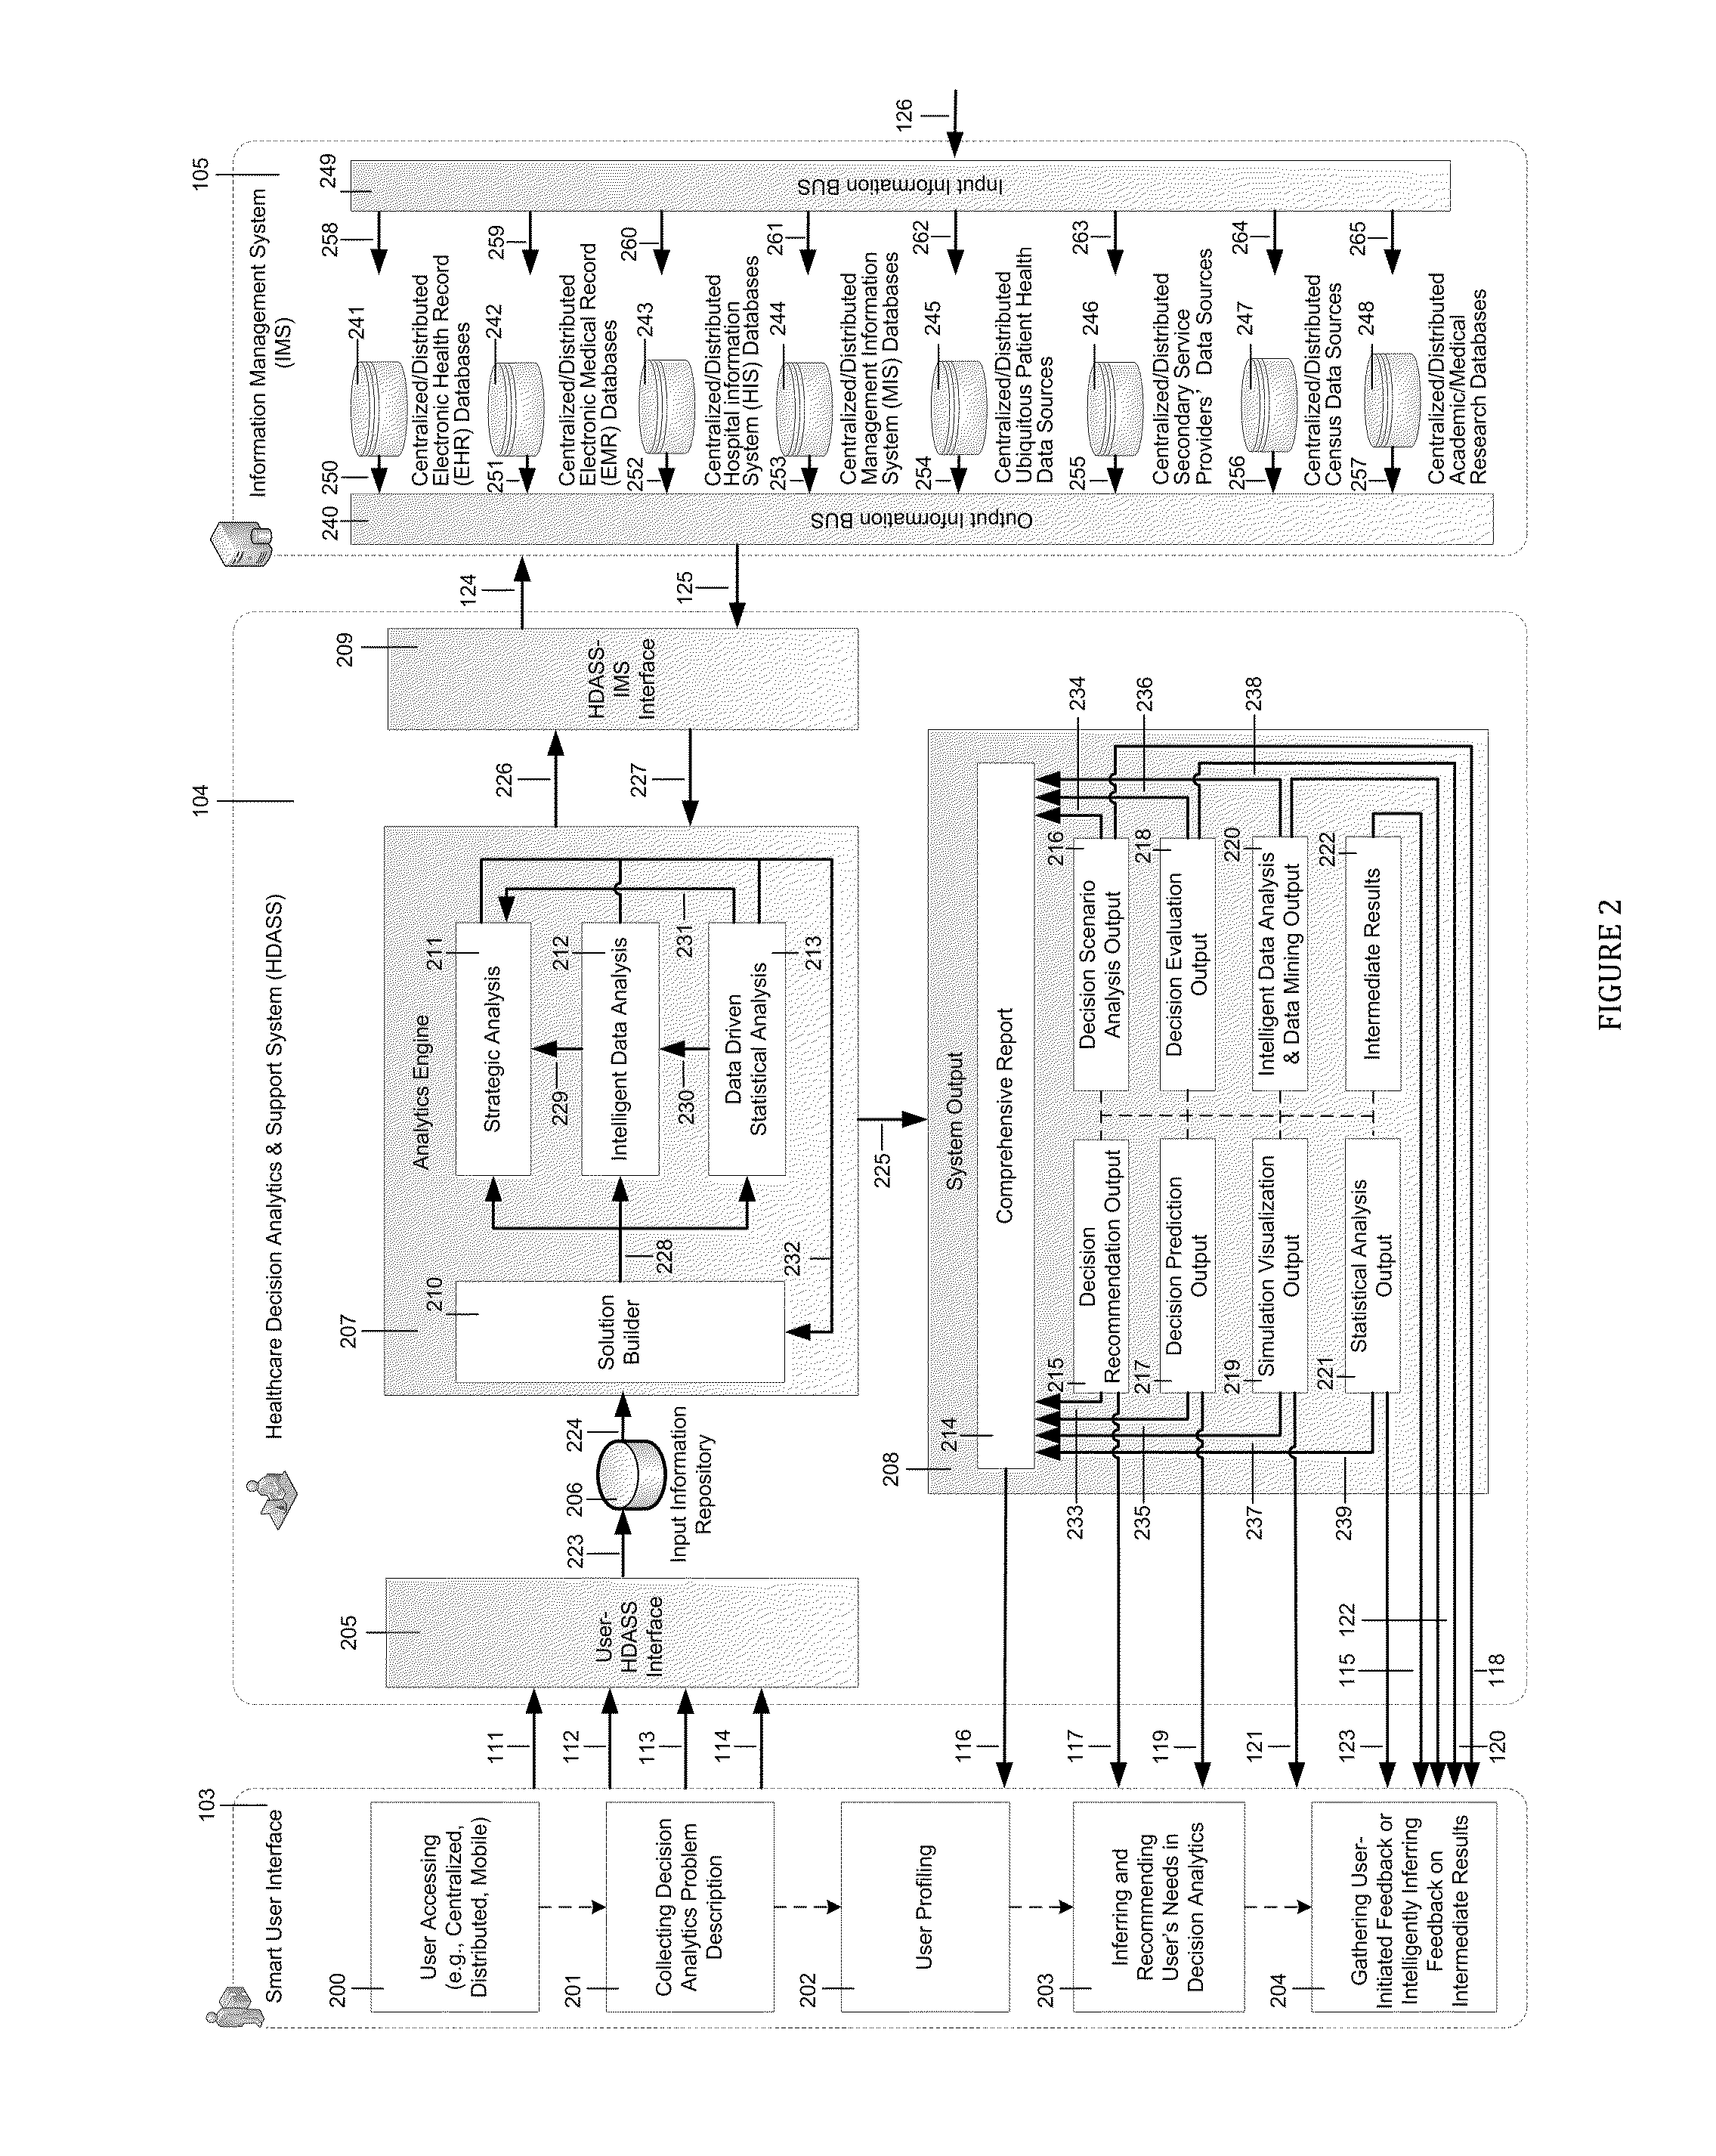 Methods and Apparatus for Smart Healthcare Decision Analytics and Support